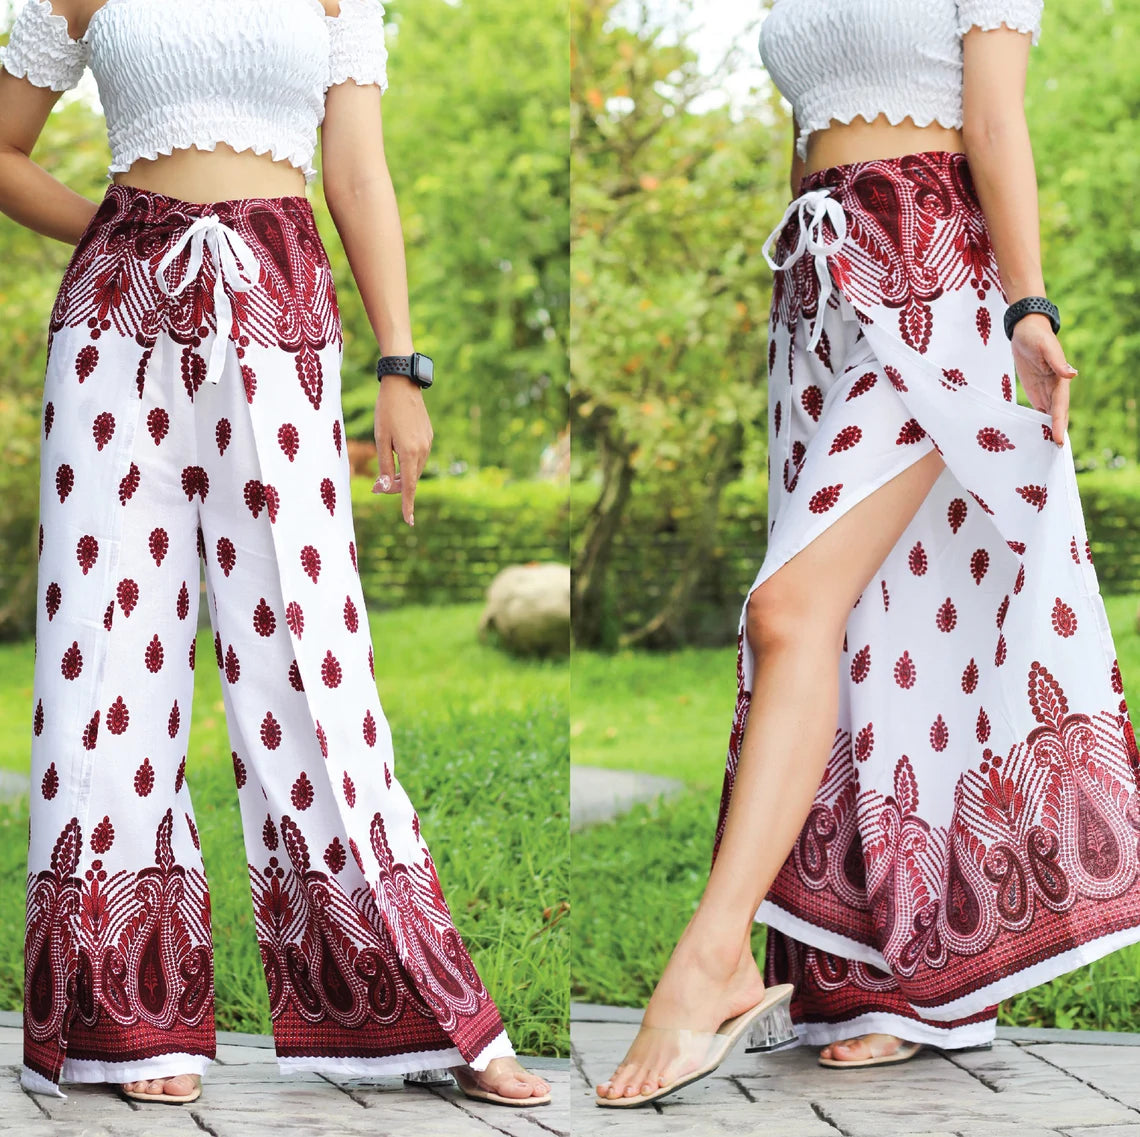 A person wearing boho wrap pants with a white and red pattern, paired with a white top, standing outdoors.